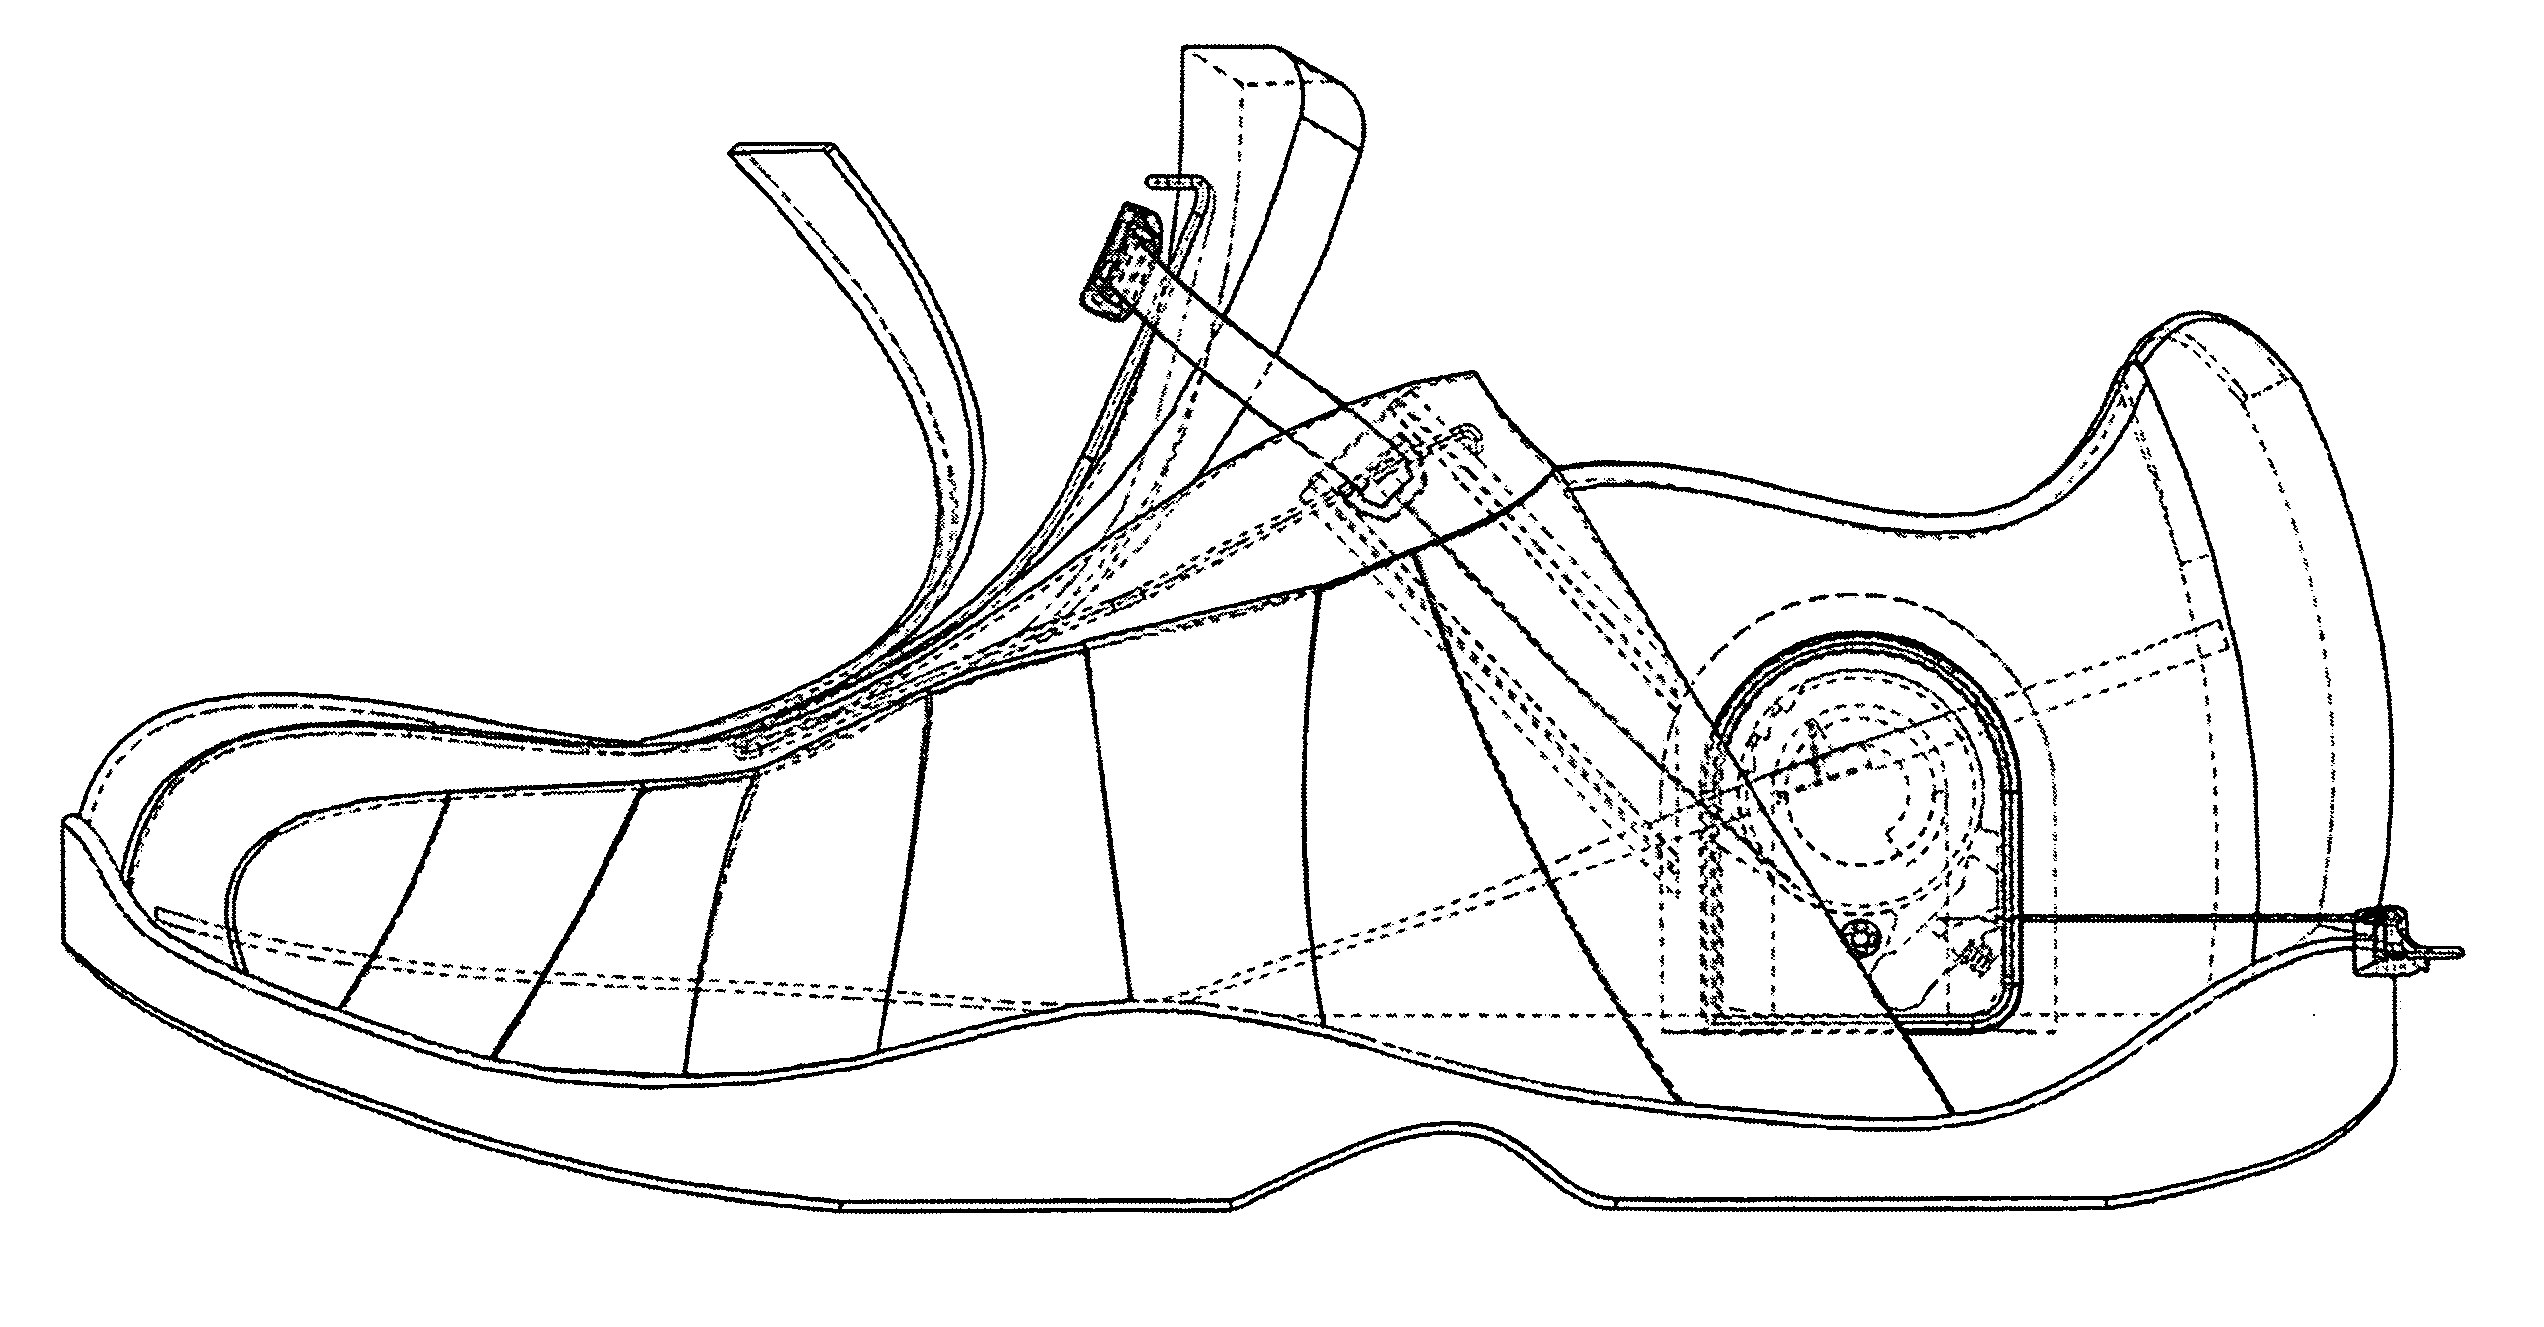 Weight-activated tying shoe